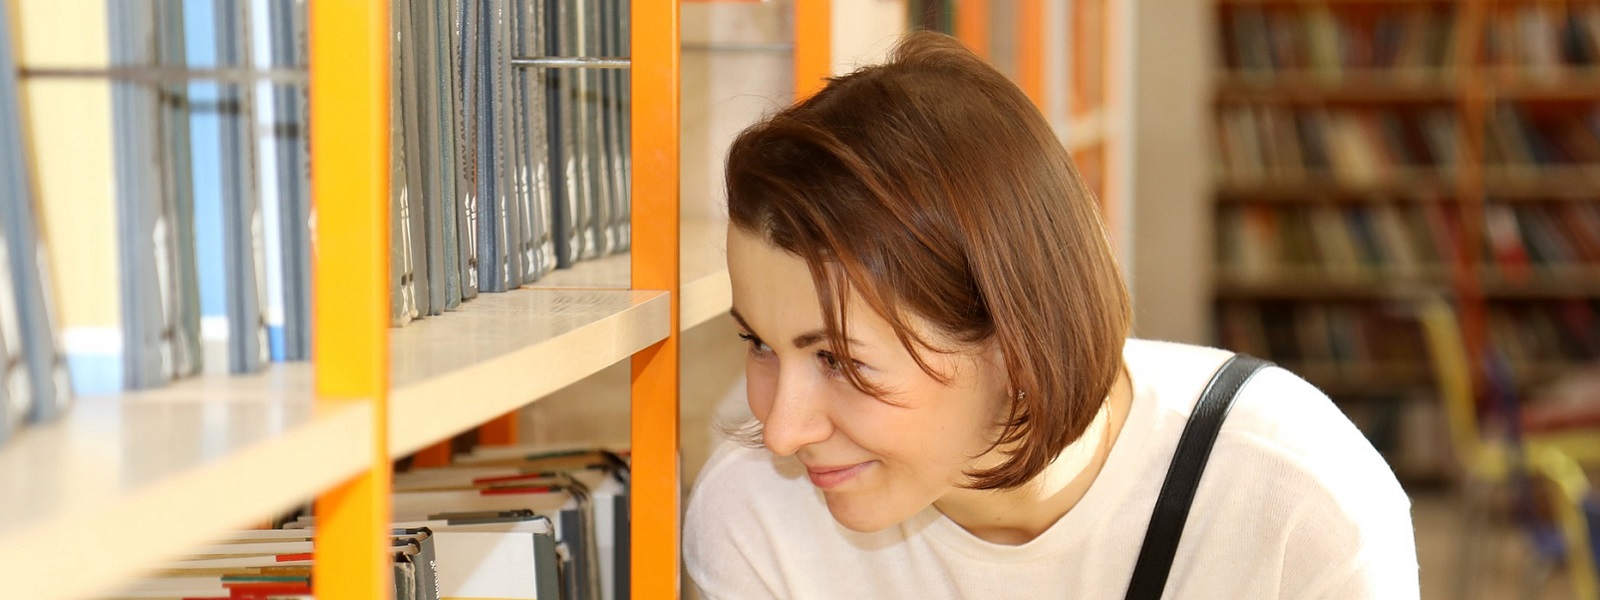 A student looking at shelves of books in the library